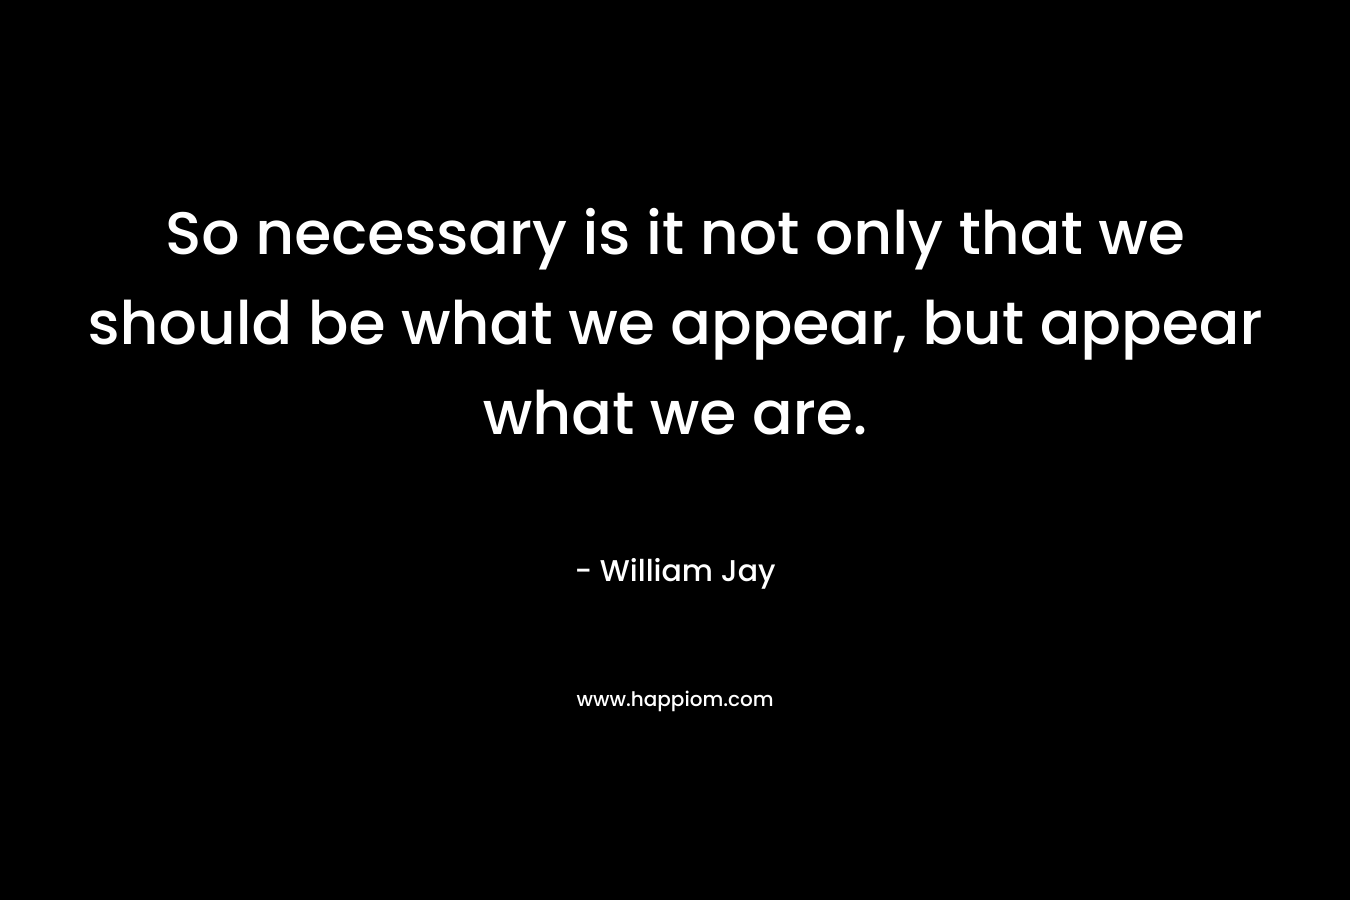 So necessary is it not only that we should be what we appear, but appear what we are. – William Jay